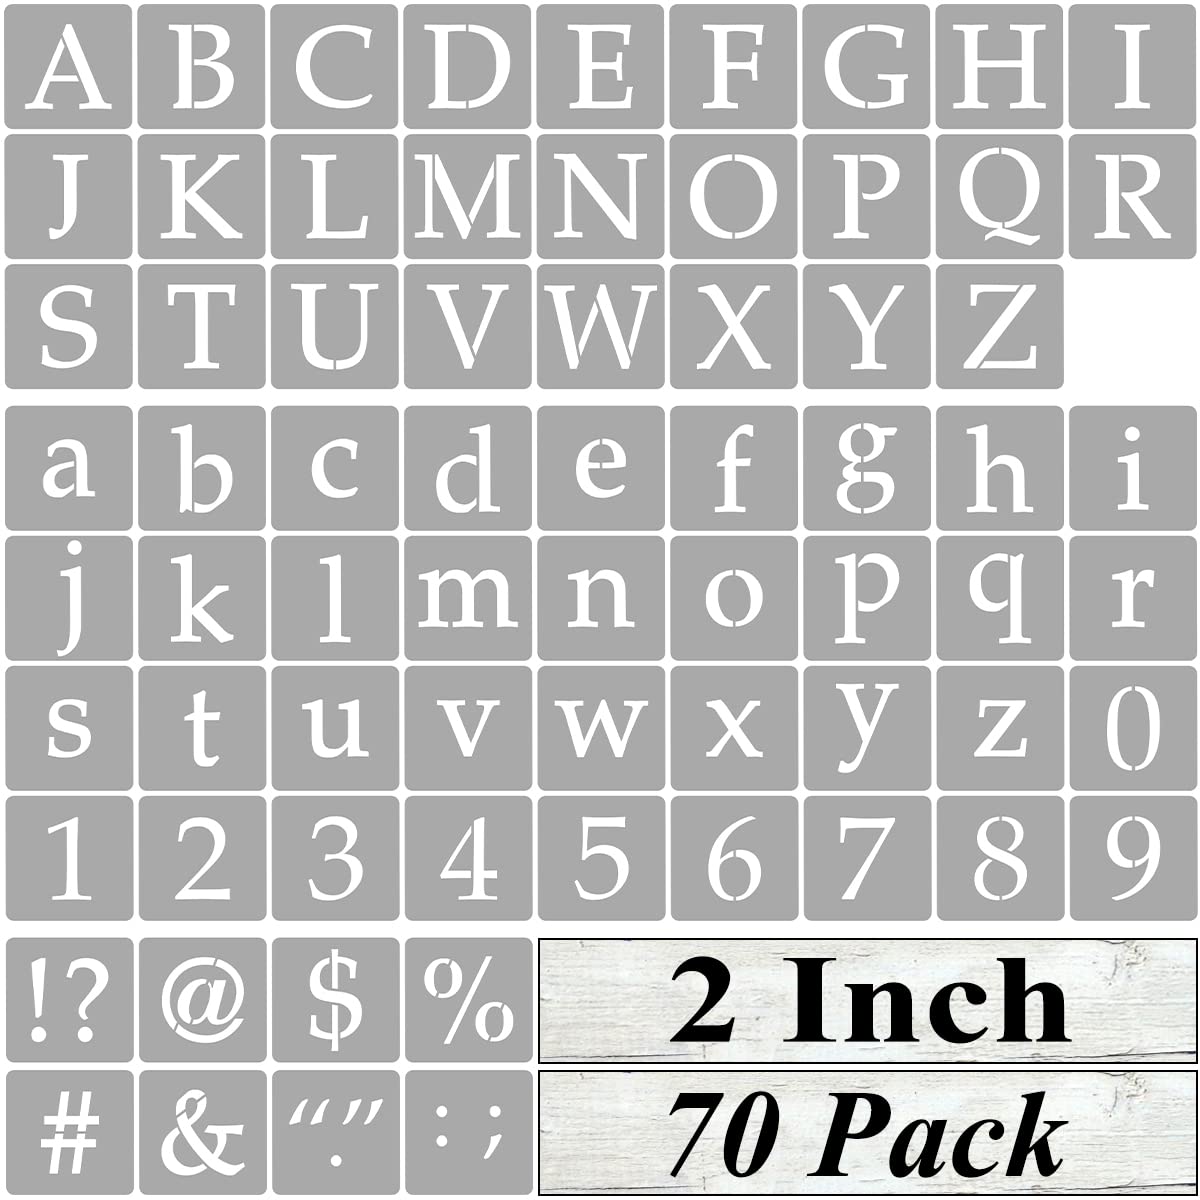 2 Inch Alphabet Letter Stencils for Painting - 70 Pack Letter and